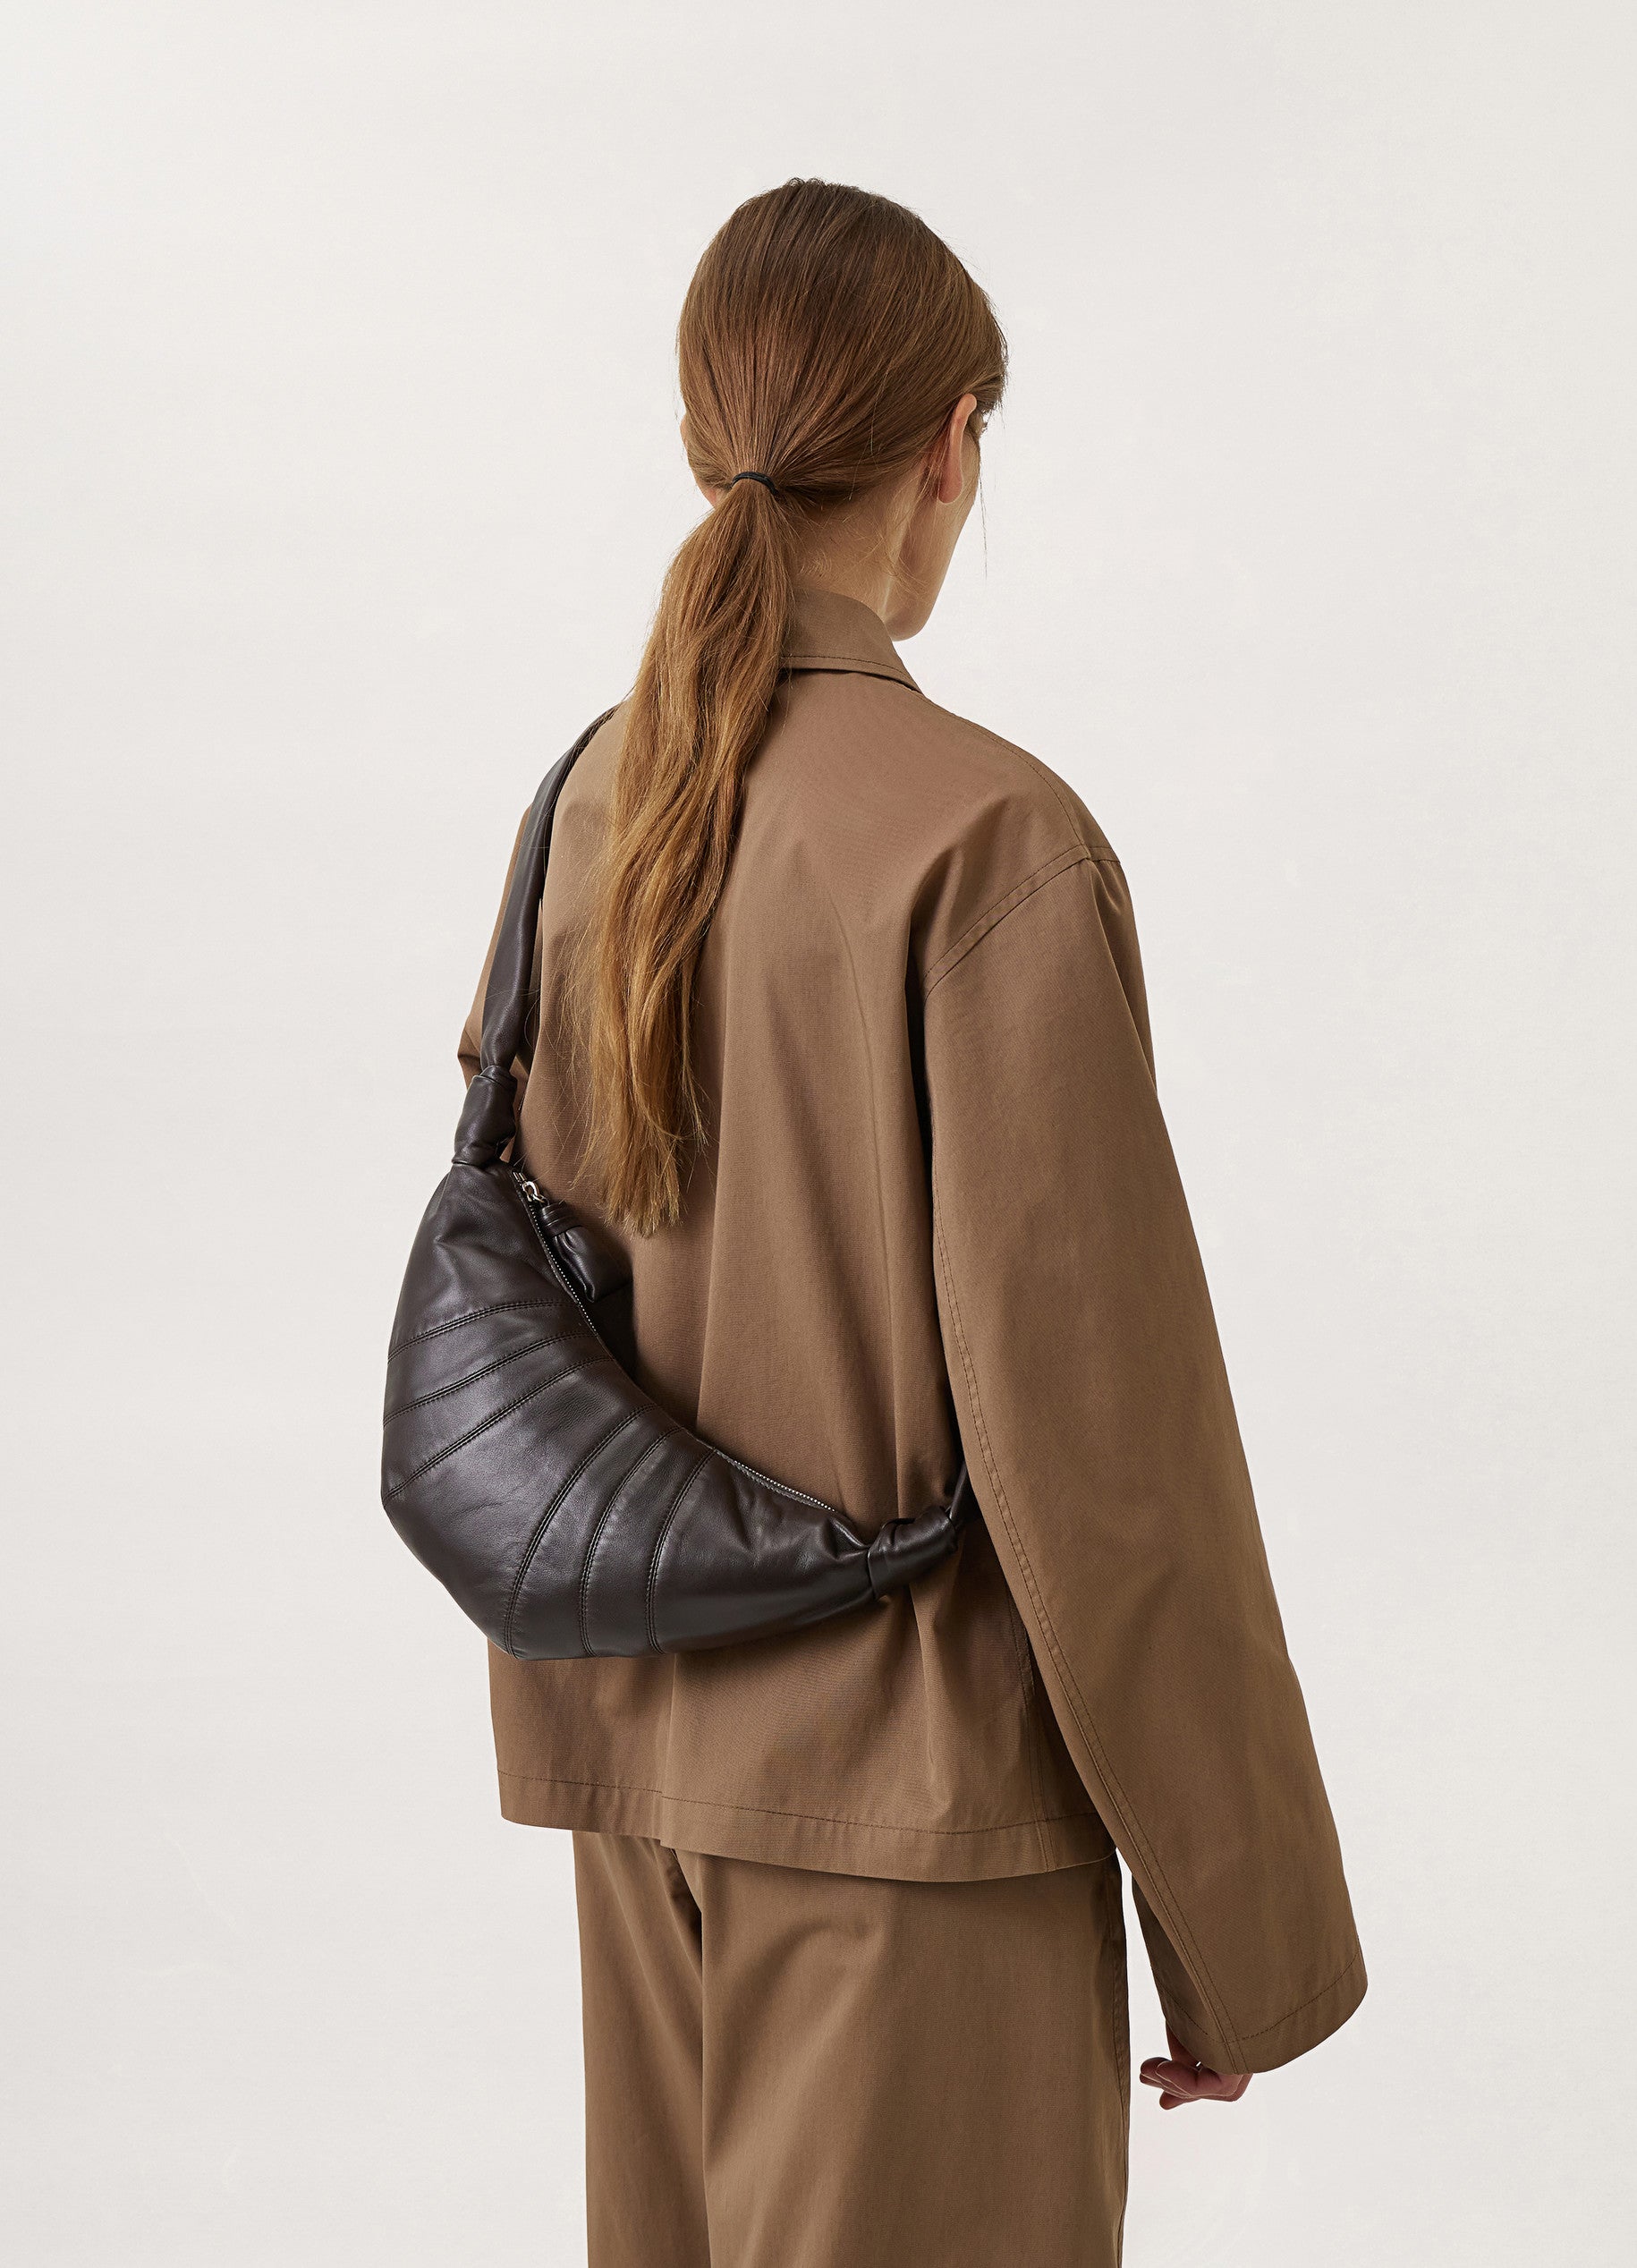 Small Croissant Bag - Dark Chocolate Leather | LEMAIRE - Lemaire-USA